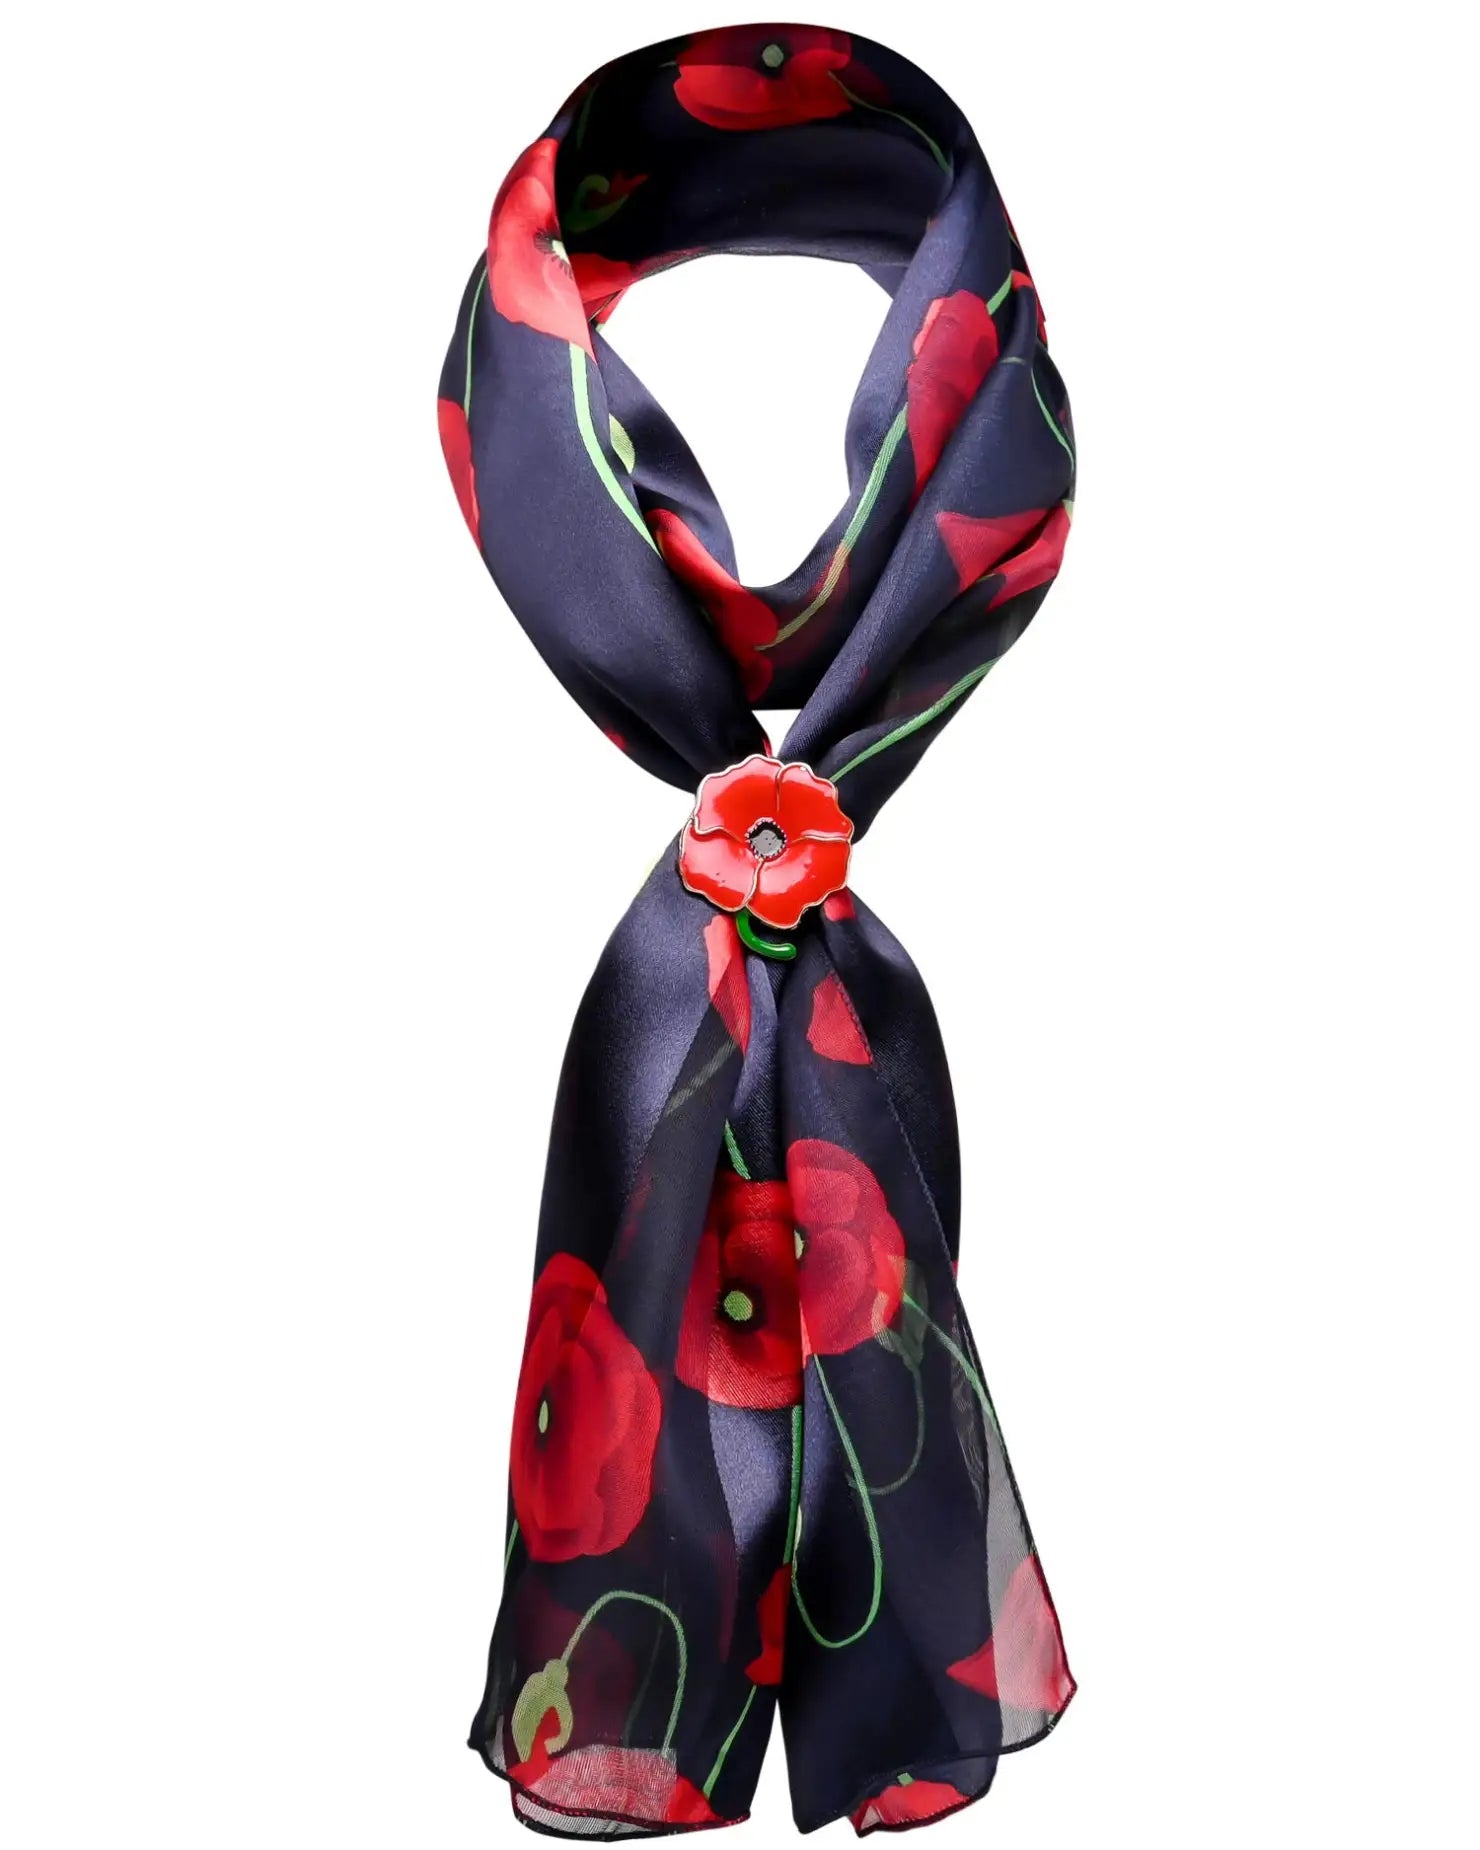 Black and red floral scarf from Poppy Floral Print Scarf & Gold Plated Ring Set